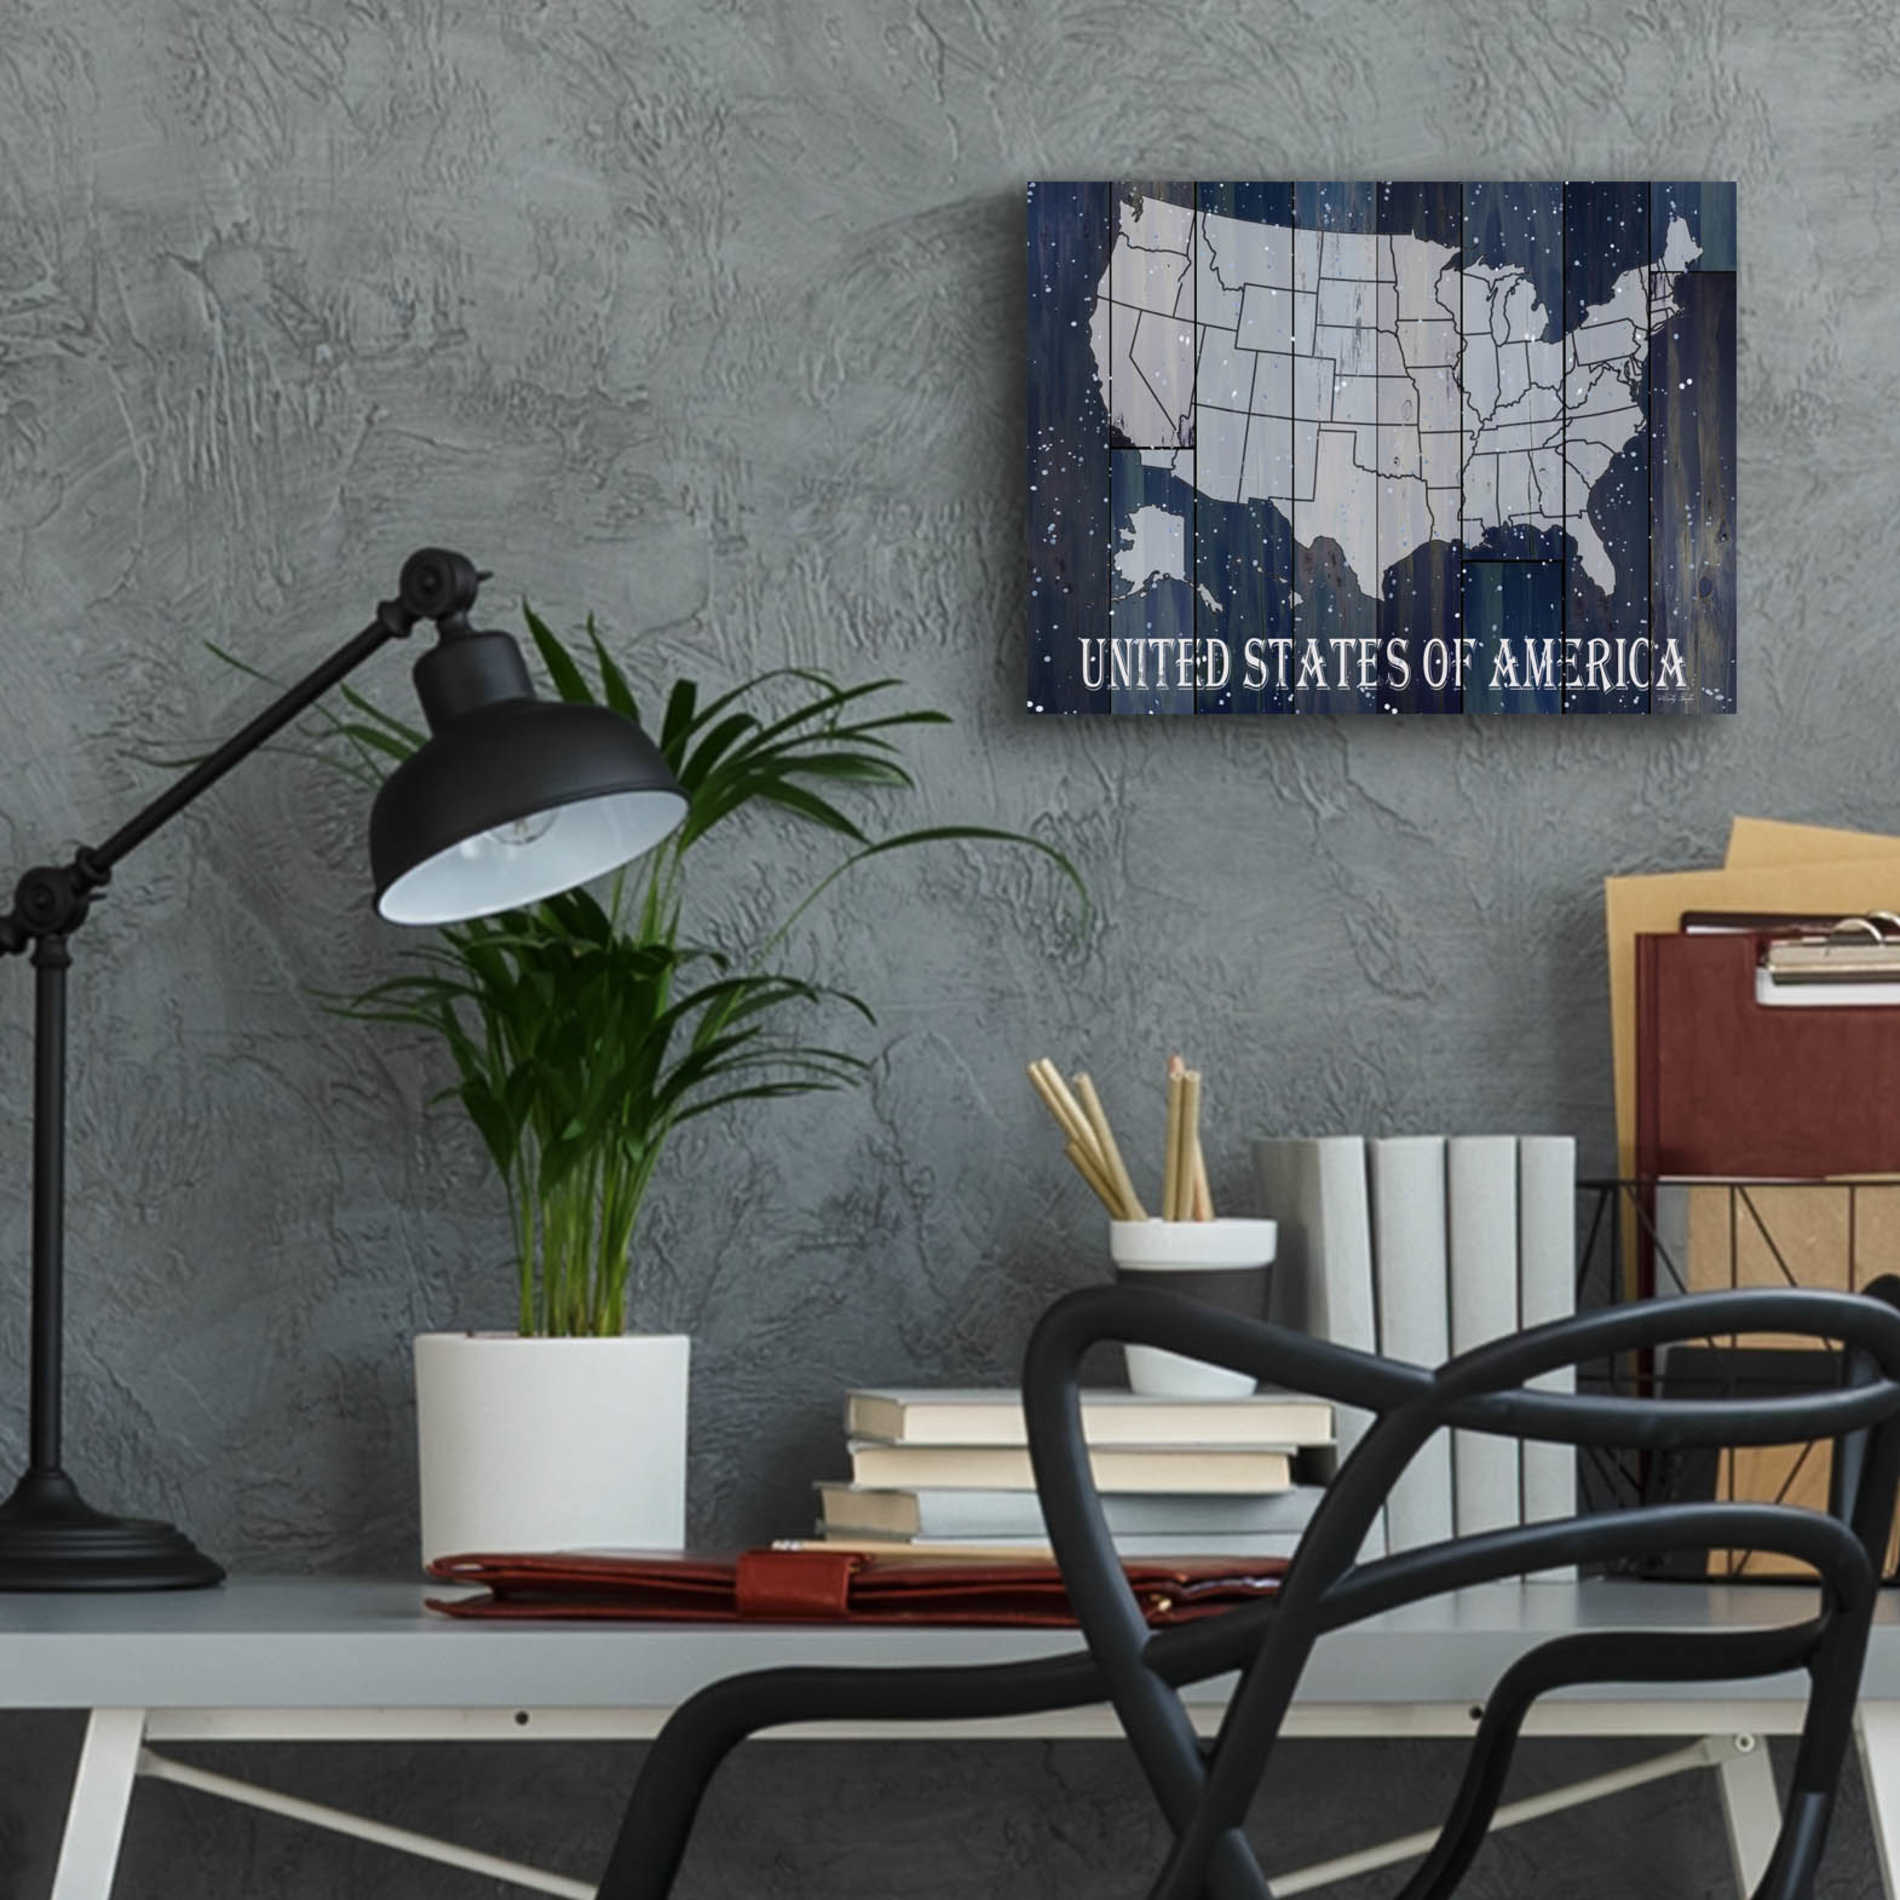 Epic Art 'Navy United States of America' by Cindy Jacobs, Acrylic Glass Wall Art,16x12